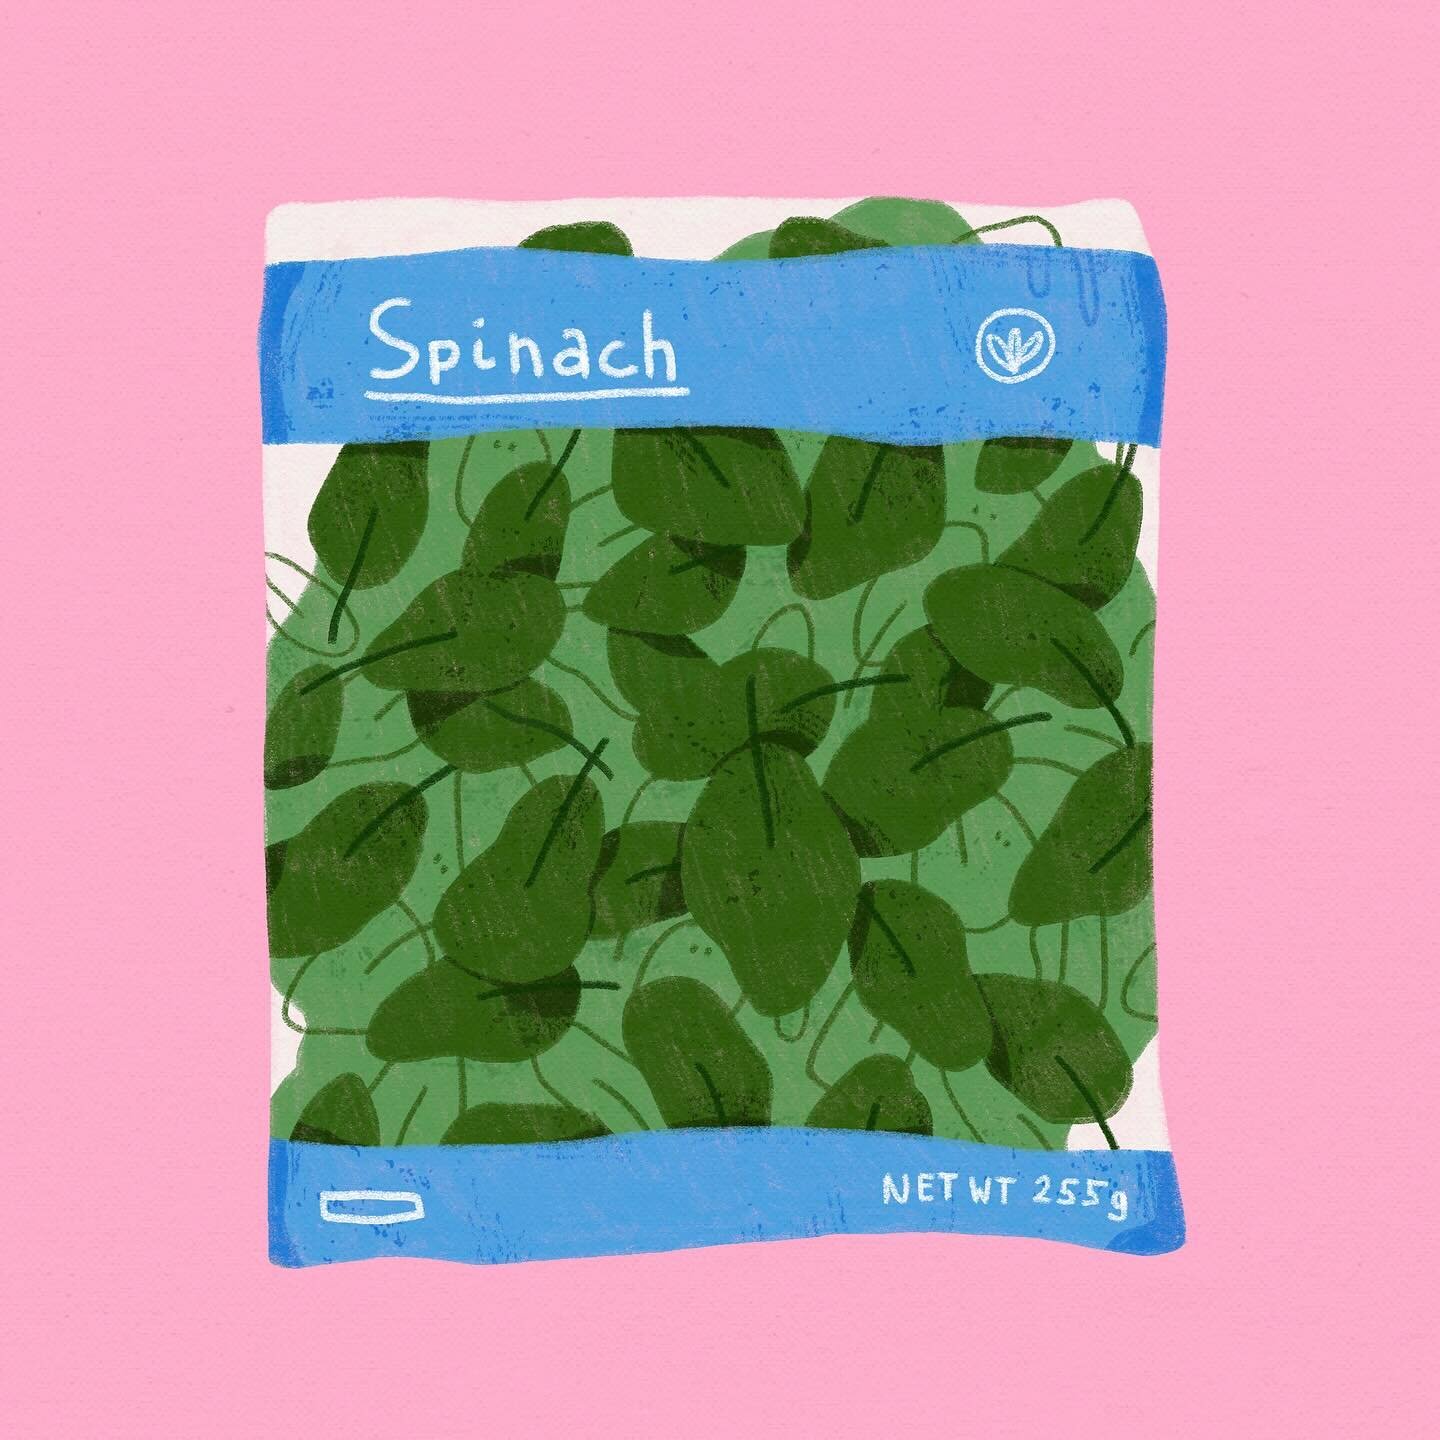 Just finished a new illustration of a bag of spinach 😄 Not sure what is it exactly but I really like how it turned out! I&rsquo;m tempted to make a sticker out of it hehe. 

Swipe right to see a time-lapse video 🌱

#plantillustration #spinachillust